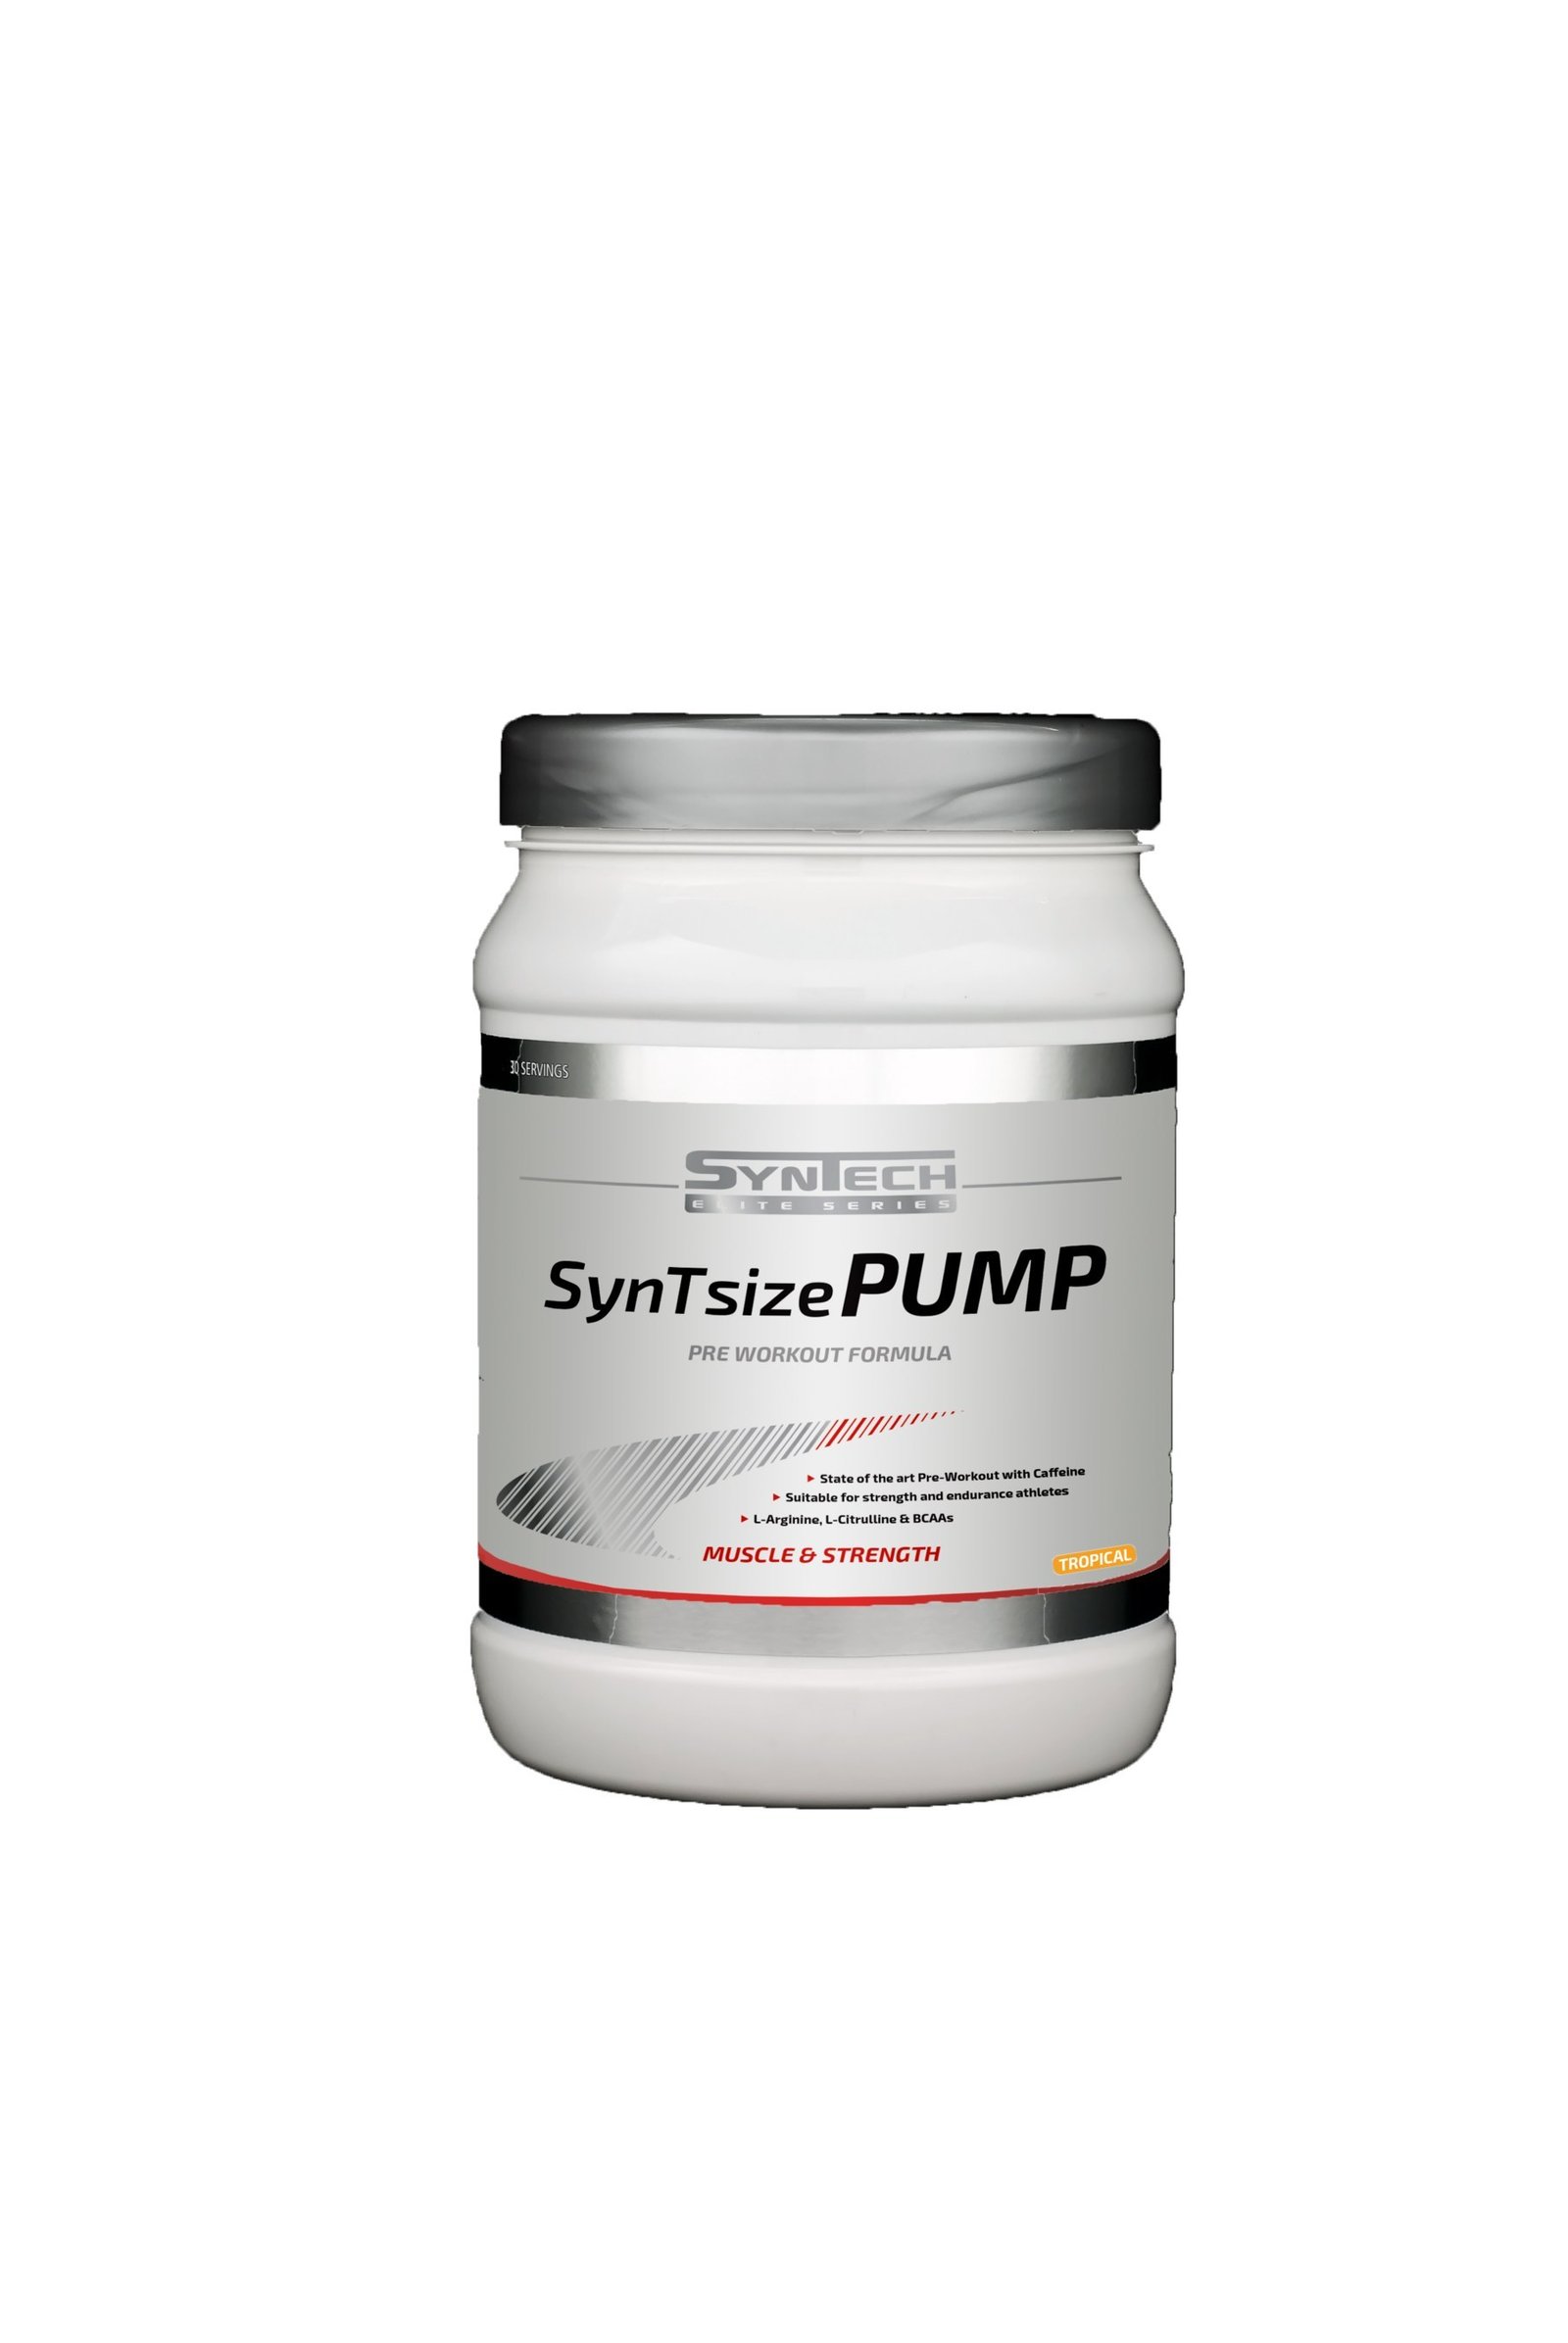 syntech-nutrition-launches-all-in-one-pre-workout-supplement